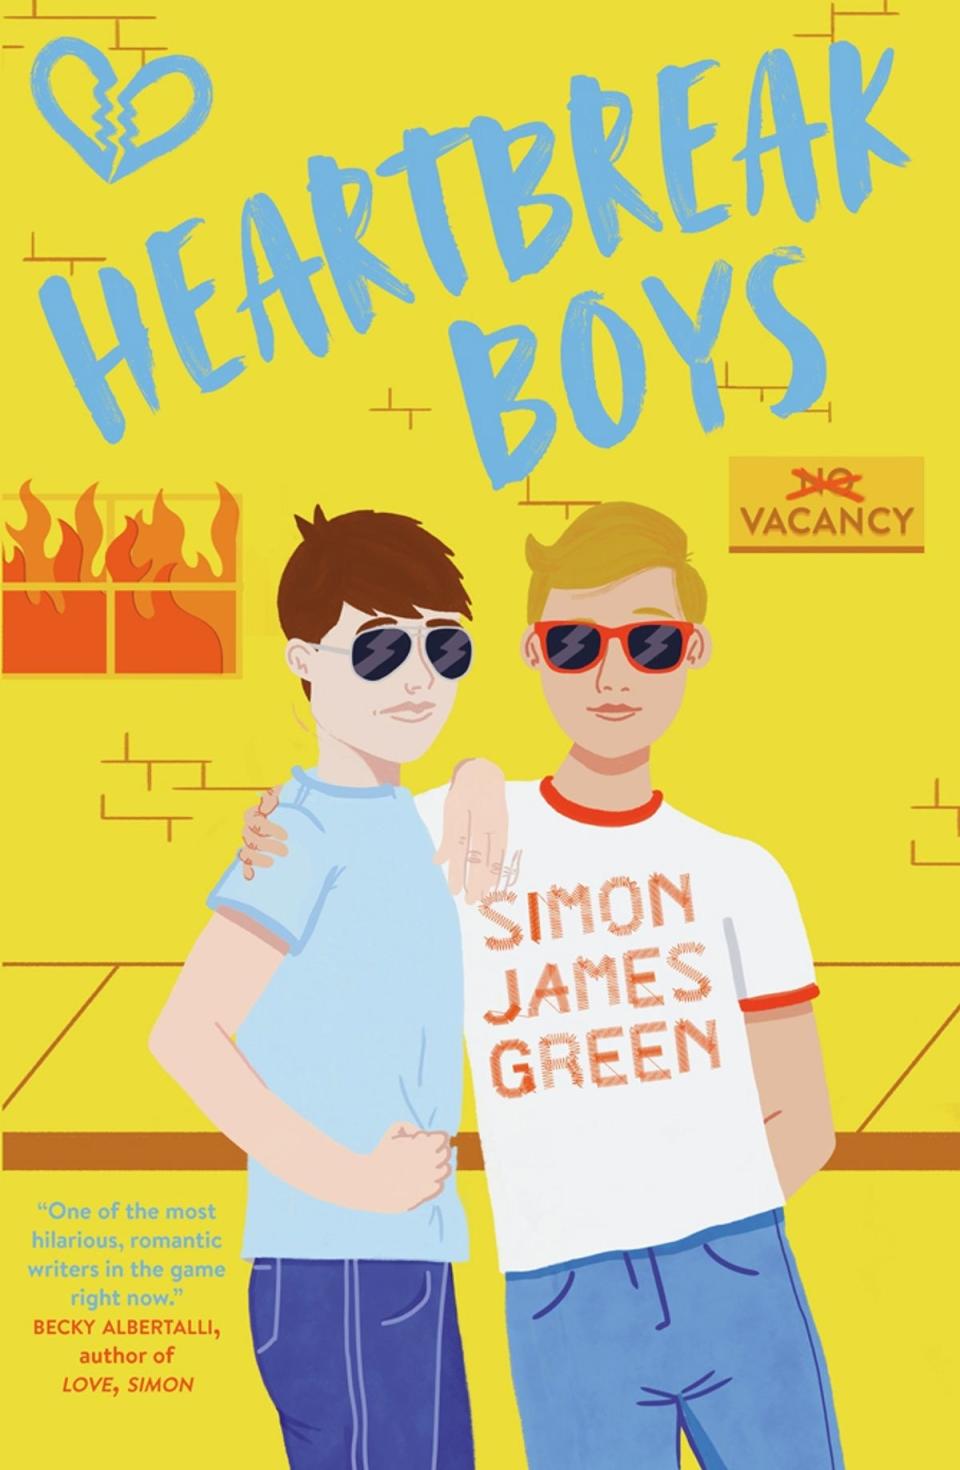 Simon and Nate are former childhood friends now tied together by something terrible: they were dumped by their exes, who continue to humiliate them by dating each other and flaunting their relationship on social media. To get back at them, Simon and Nate go on a road trip across England. Nate is shy and a bit of a recluse, but Simon is out there, bursting with life, inspiring Nate to come out of his shell. Through their pretending they find real feelings for each other and suddenly, they're not faking being happy.Get it from Book Depository here.